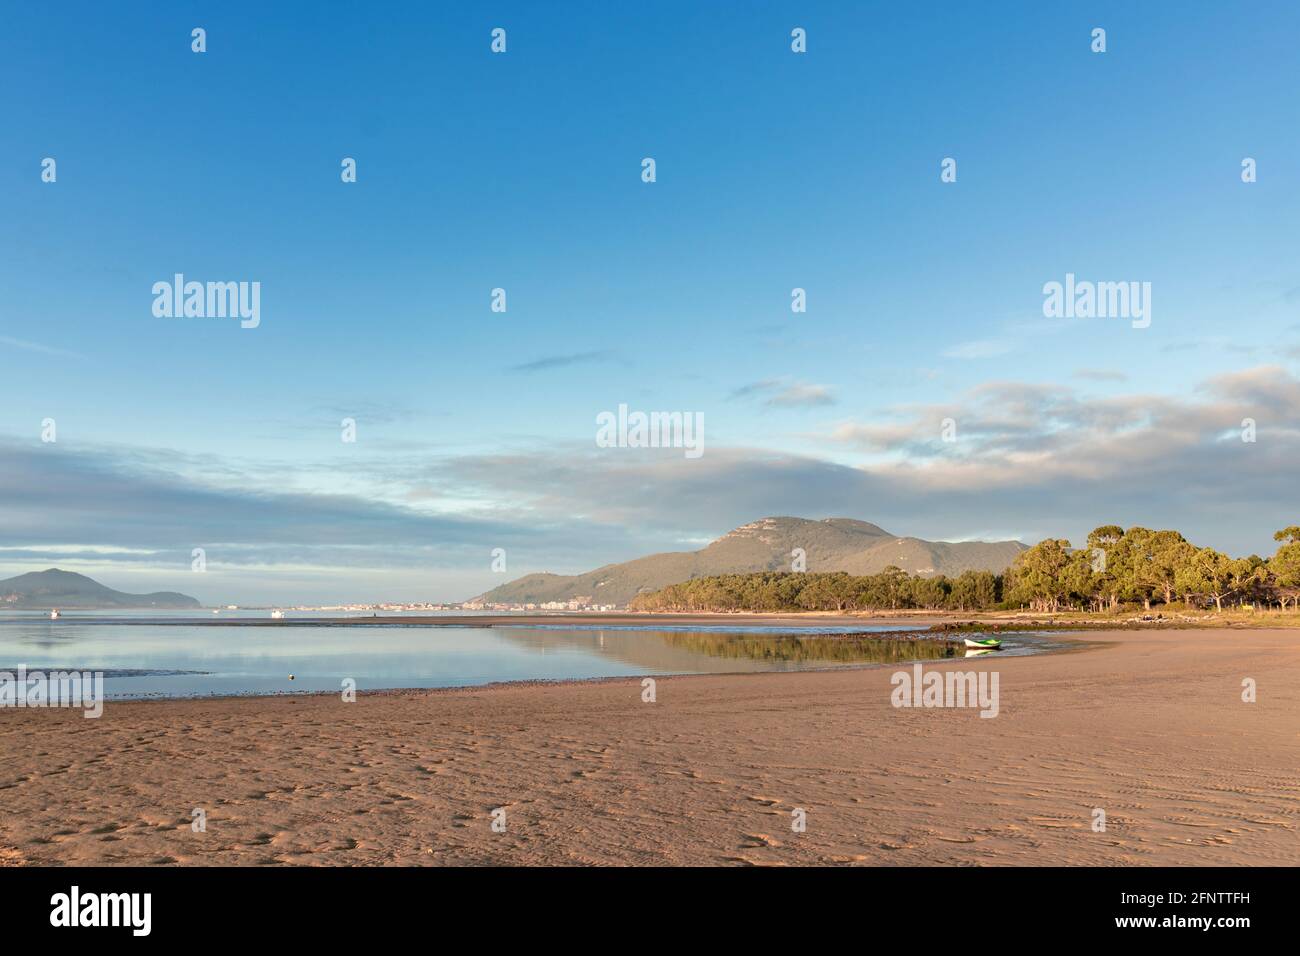 Laredo beach in northern Spain, in the autonomous region of Cantabria at sunset Stock Photo